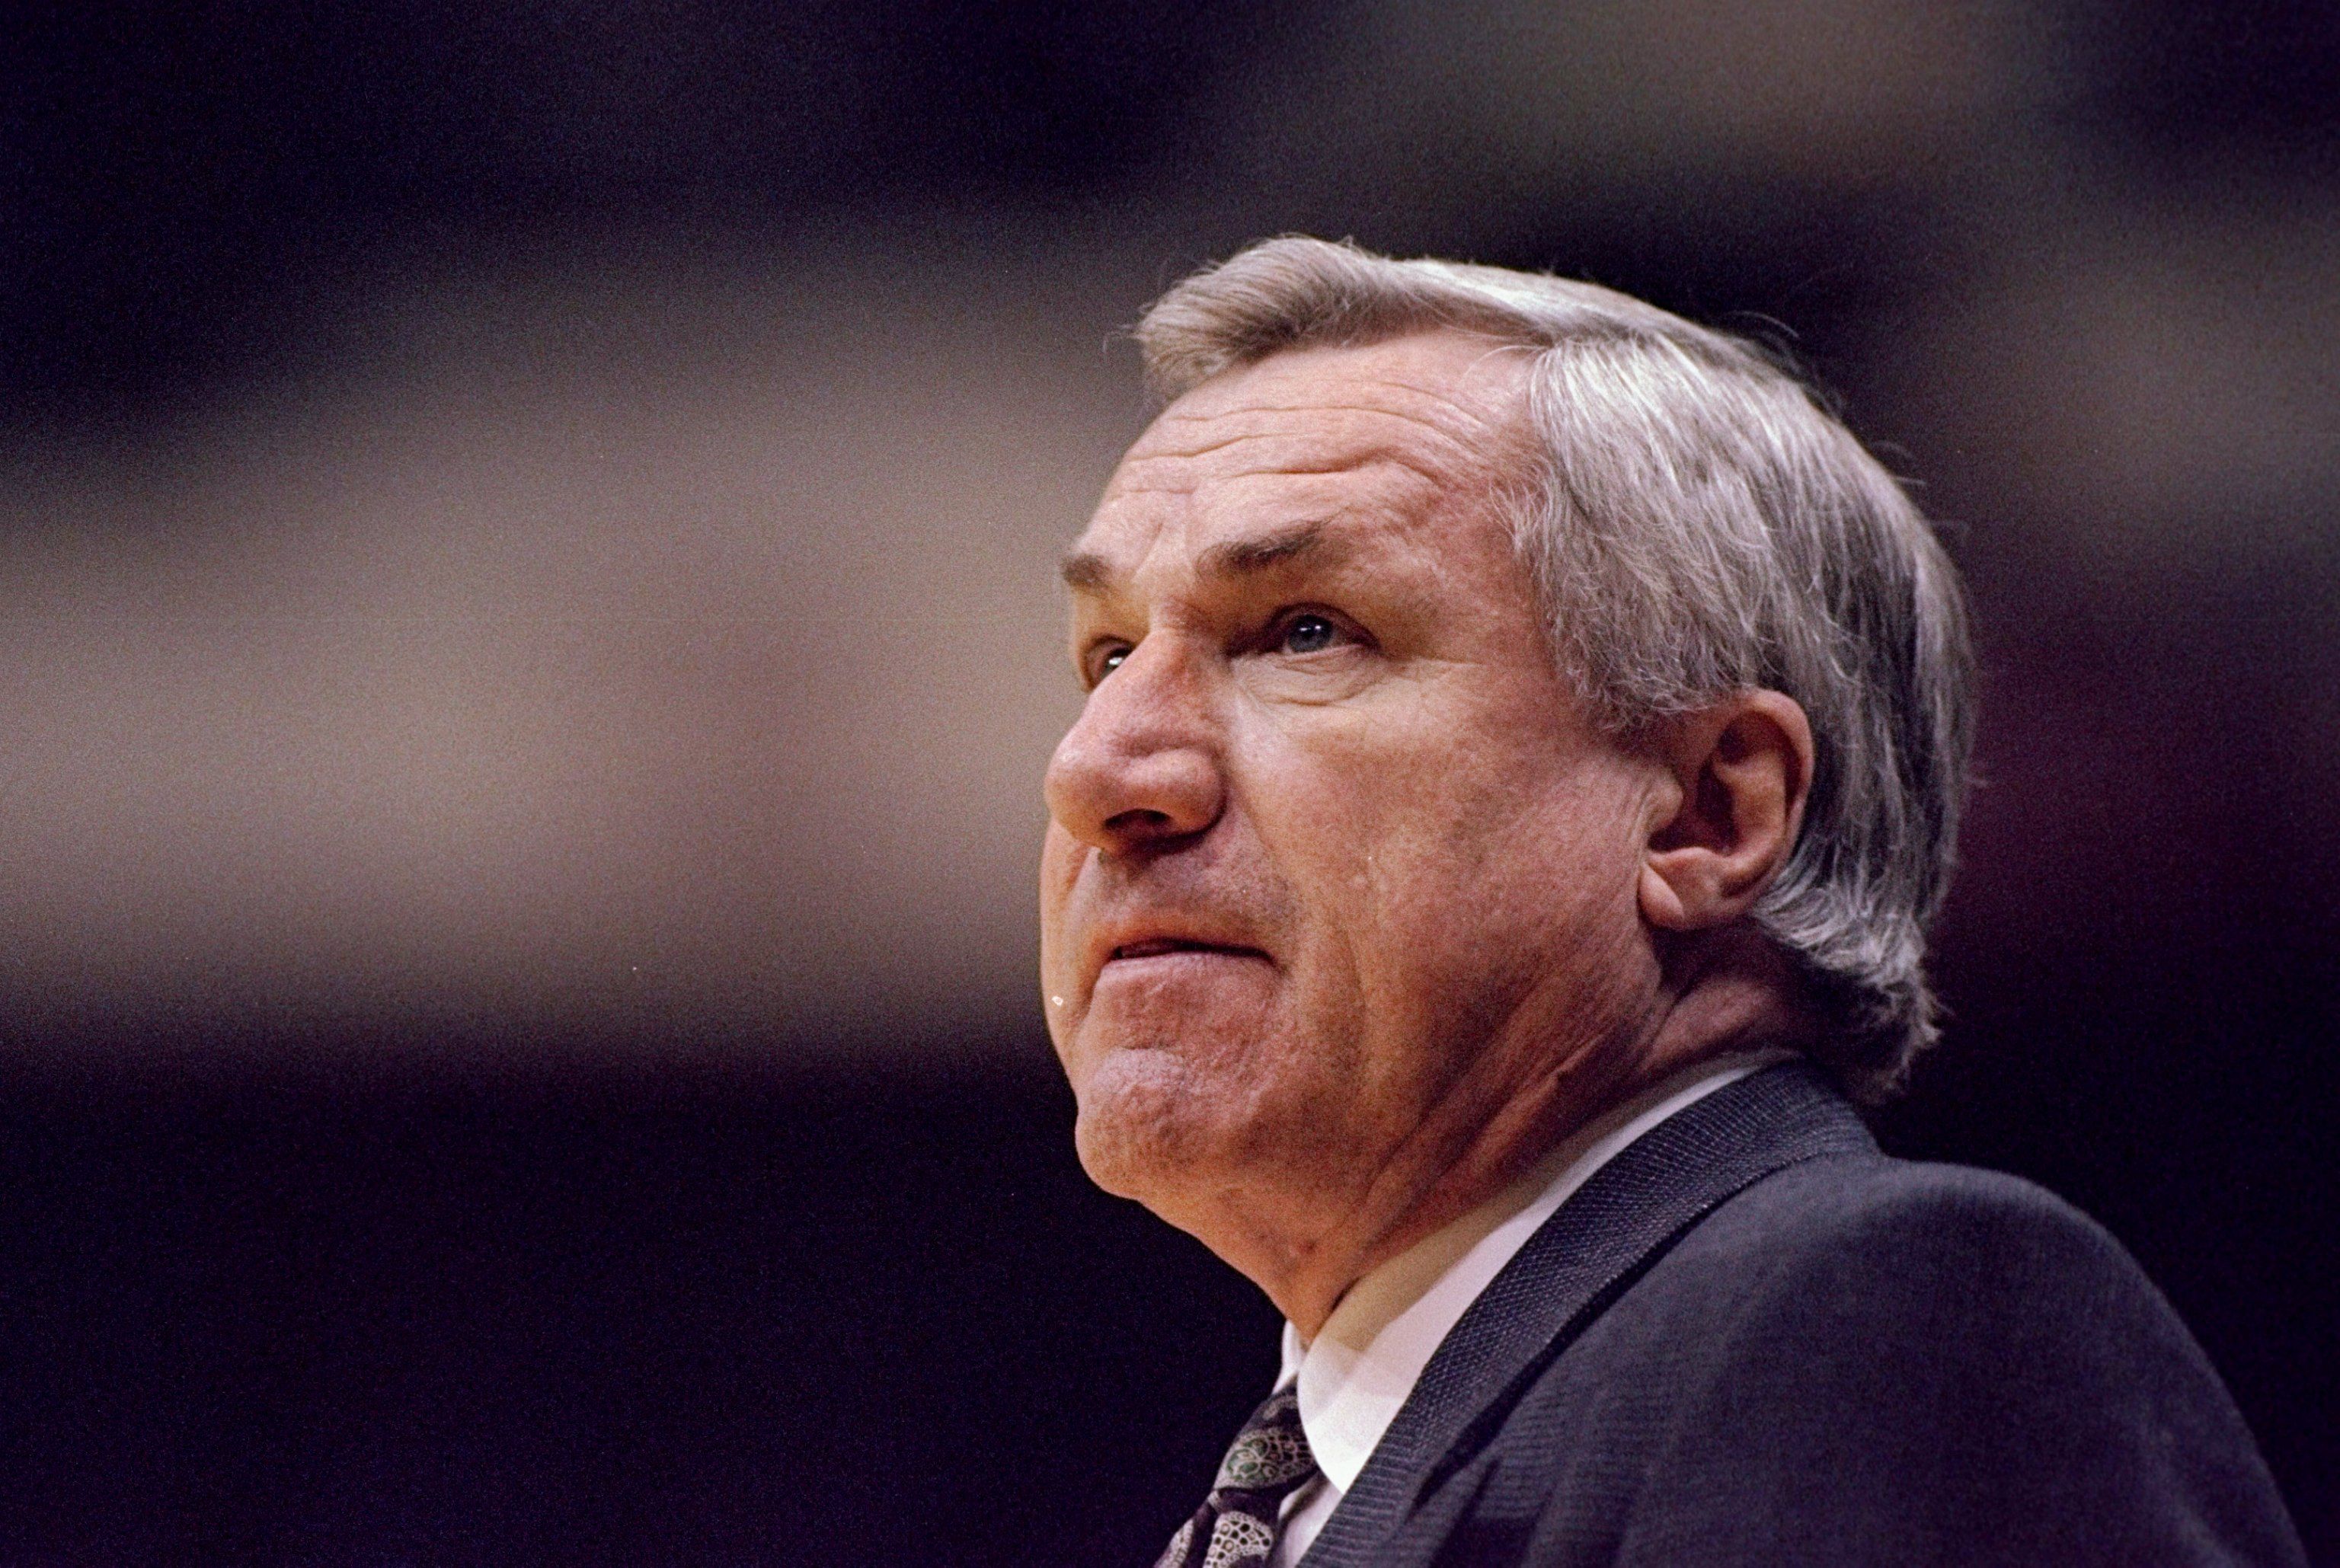 Dean Smith of the North Carolina Tar Heels looks on during a tournament game.